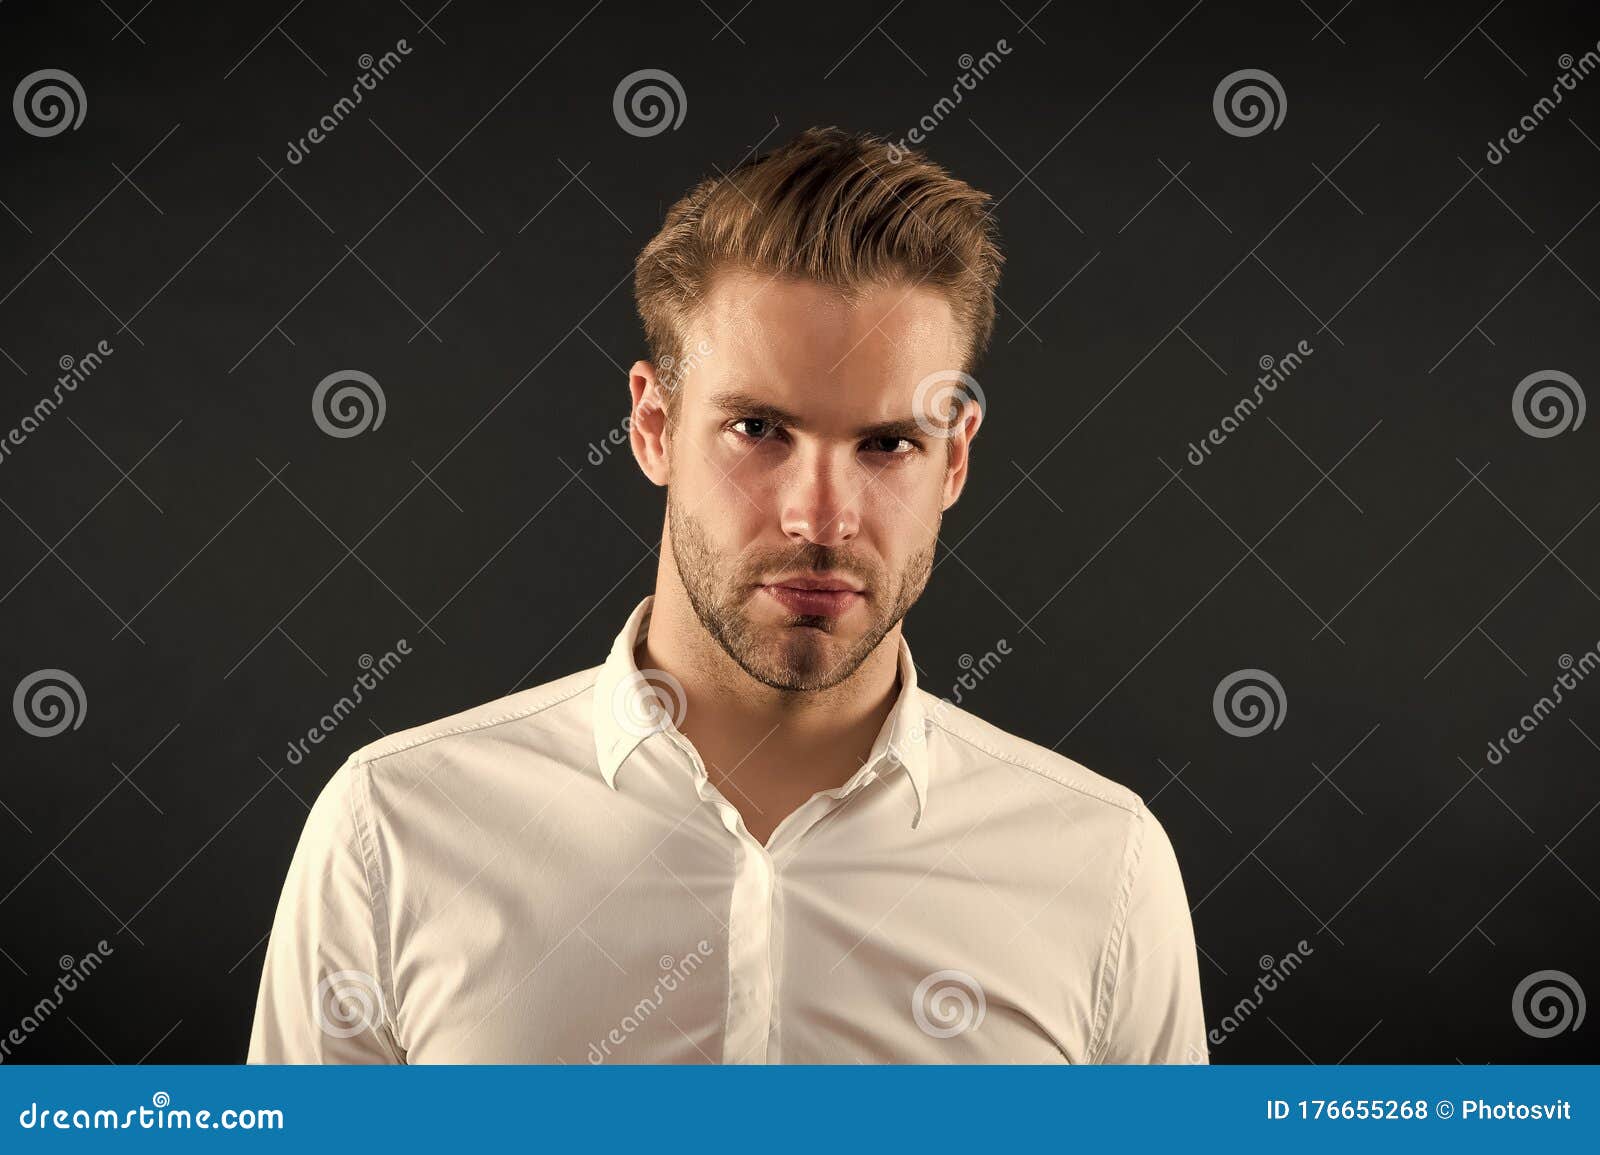 Hair Style that Suits His Face. Handsome Man with Blond Hair. Young Guy  with Stylish Beard and Mustache Hair Stock Photo - Image of care,  hairdressing: 176655268